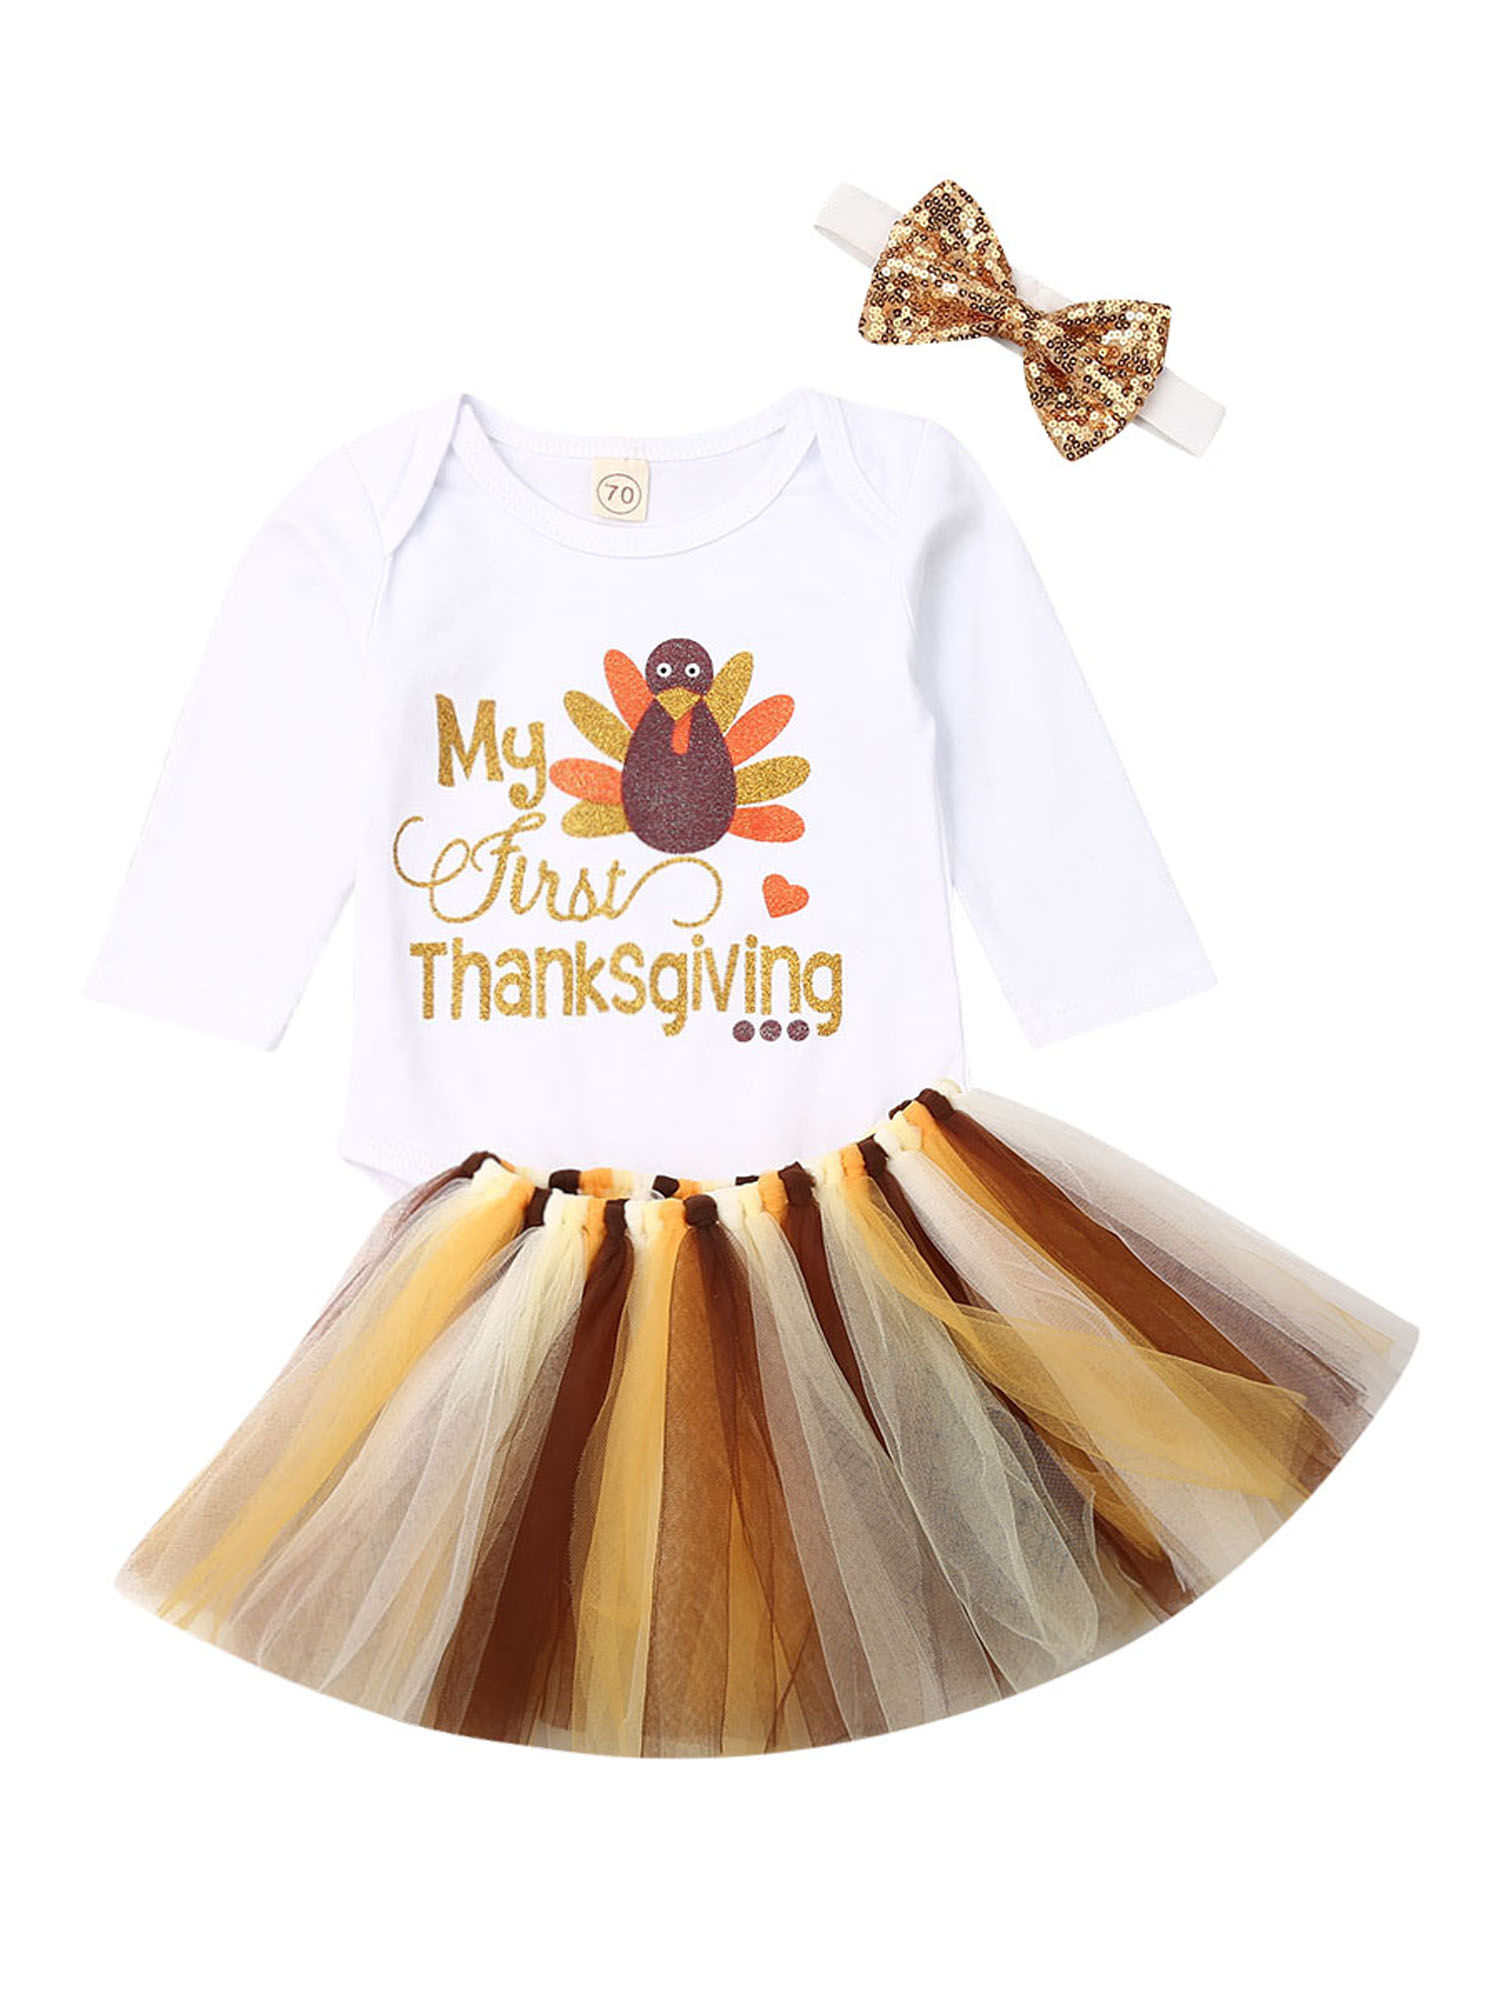 Voberry Thanksgiving Outfit Toddler Baby Girl My First Thanksgiving Romper Tutu Skirt 3Pcs Clothes Set